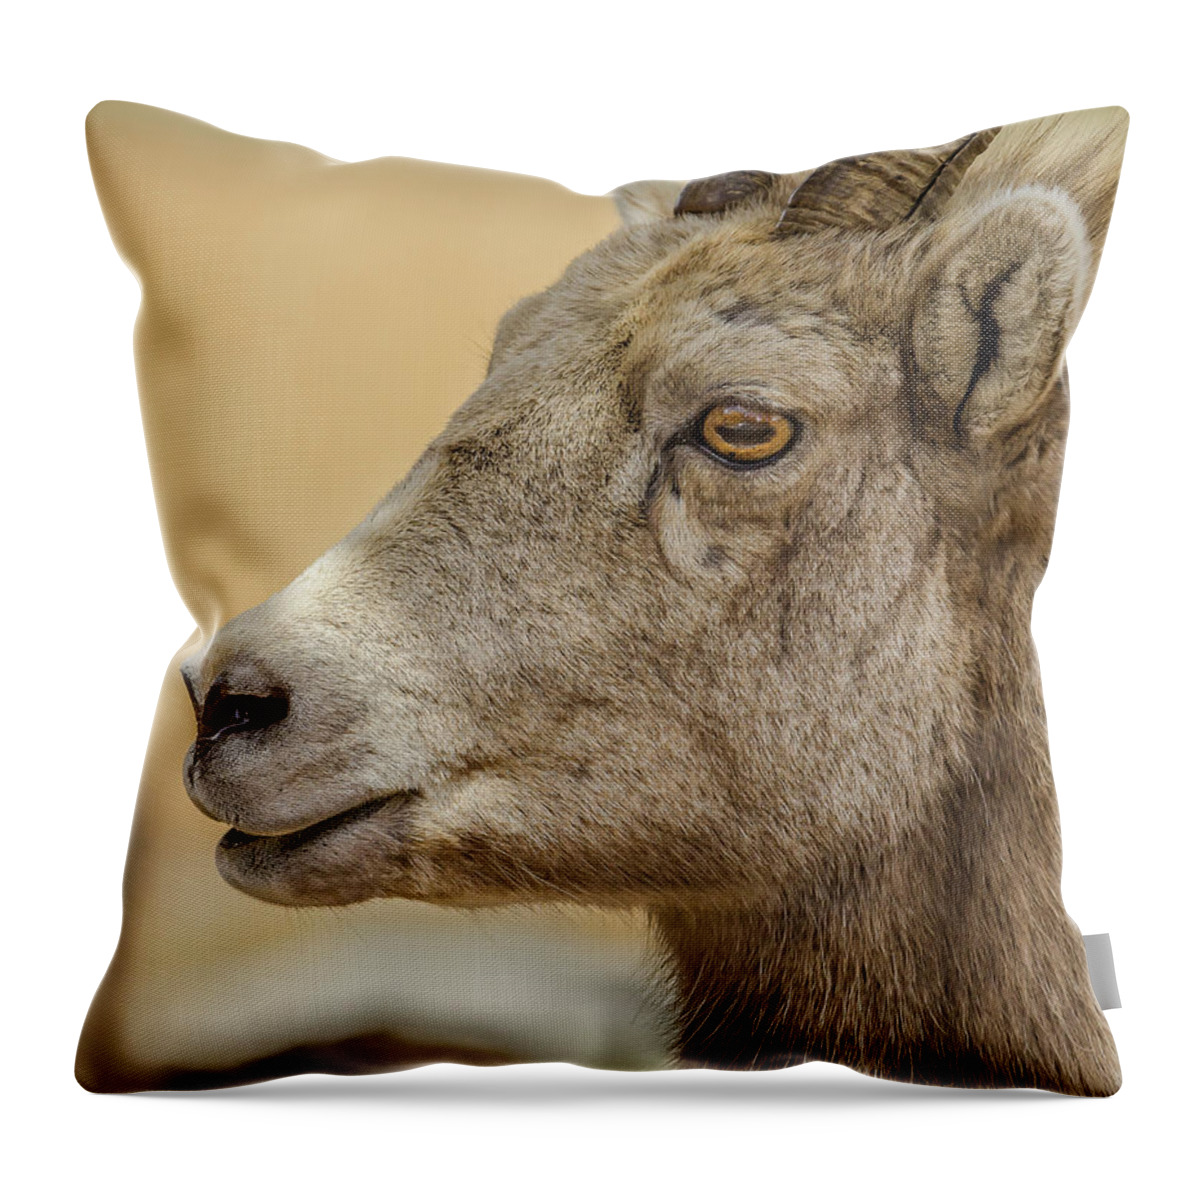 Ewe Throw Pillow featuring the photograph Ewe Glow At Sunset by Yeates Photography